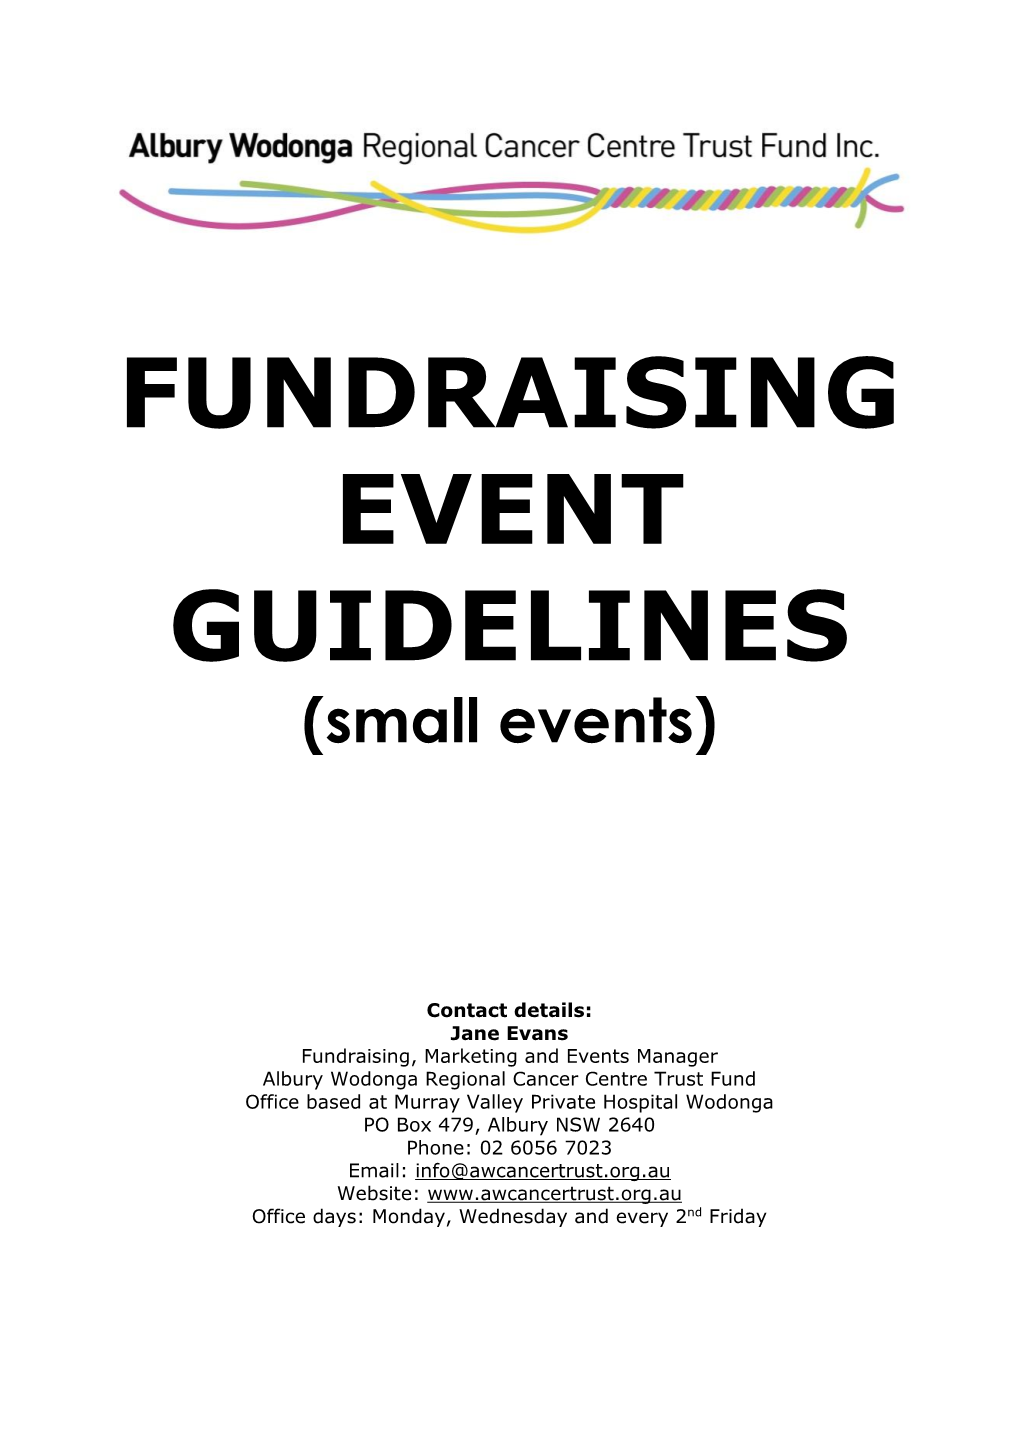 FUNDRAISING EVENT GUIDELINES (Small Events)